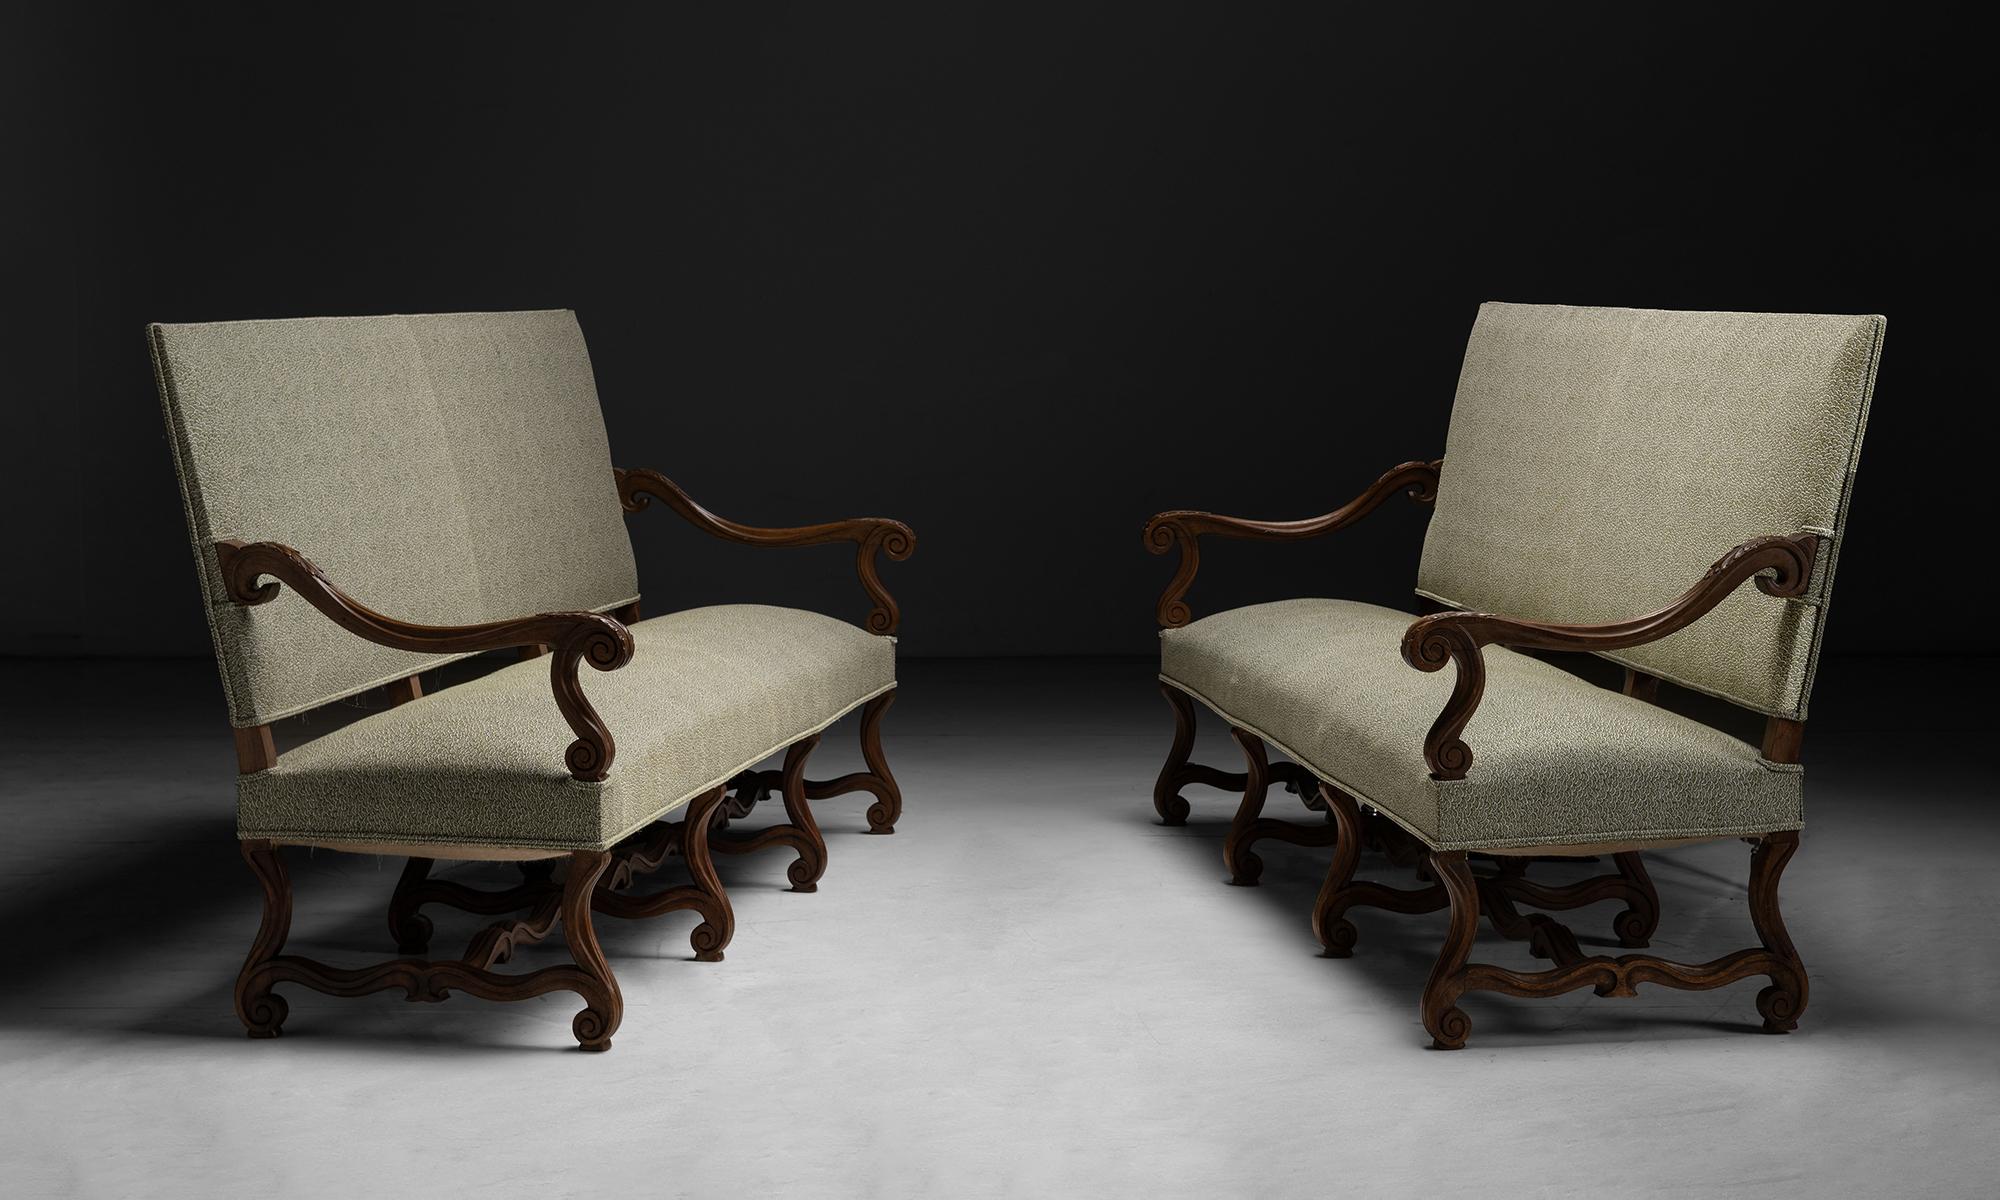 Os de Mouton Benches in Pierre Frey Linen

France Circa 1890

Newly upholstered in Pierre Frey linen blend, on antique frame.

94.5”L x 26”d x 44”h x 18”seat

Ref. SOFA263

$ 5,800 ea ( 2 avail )
